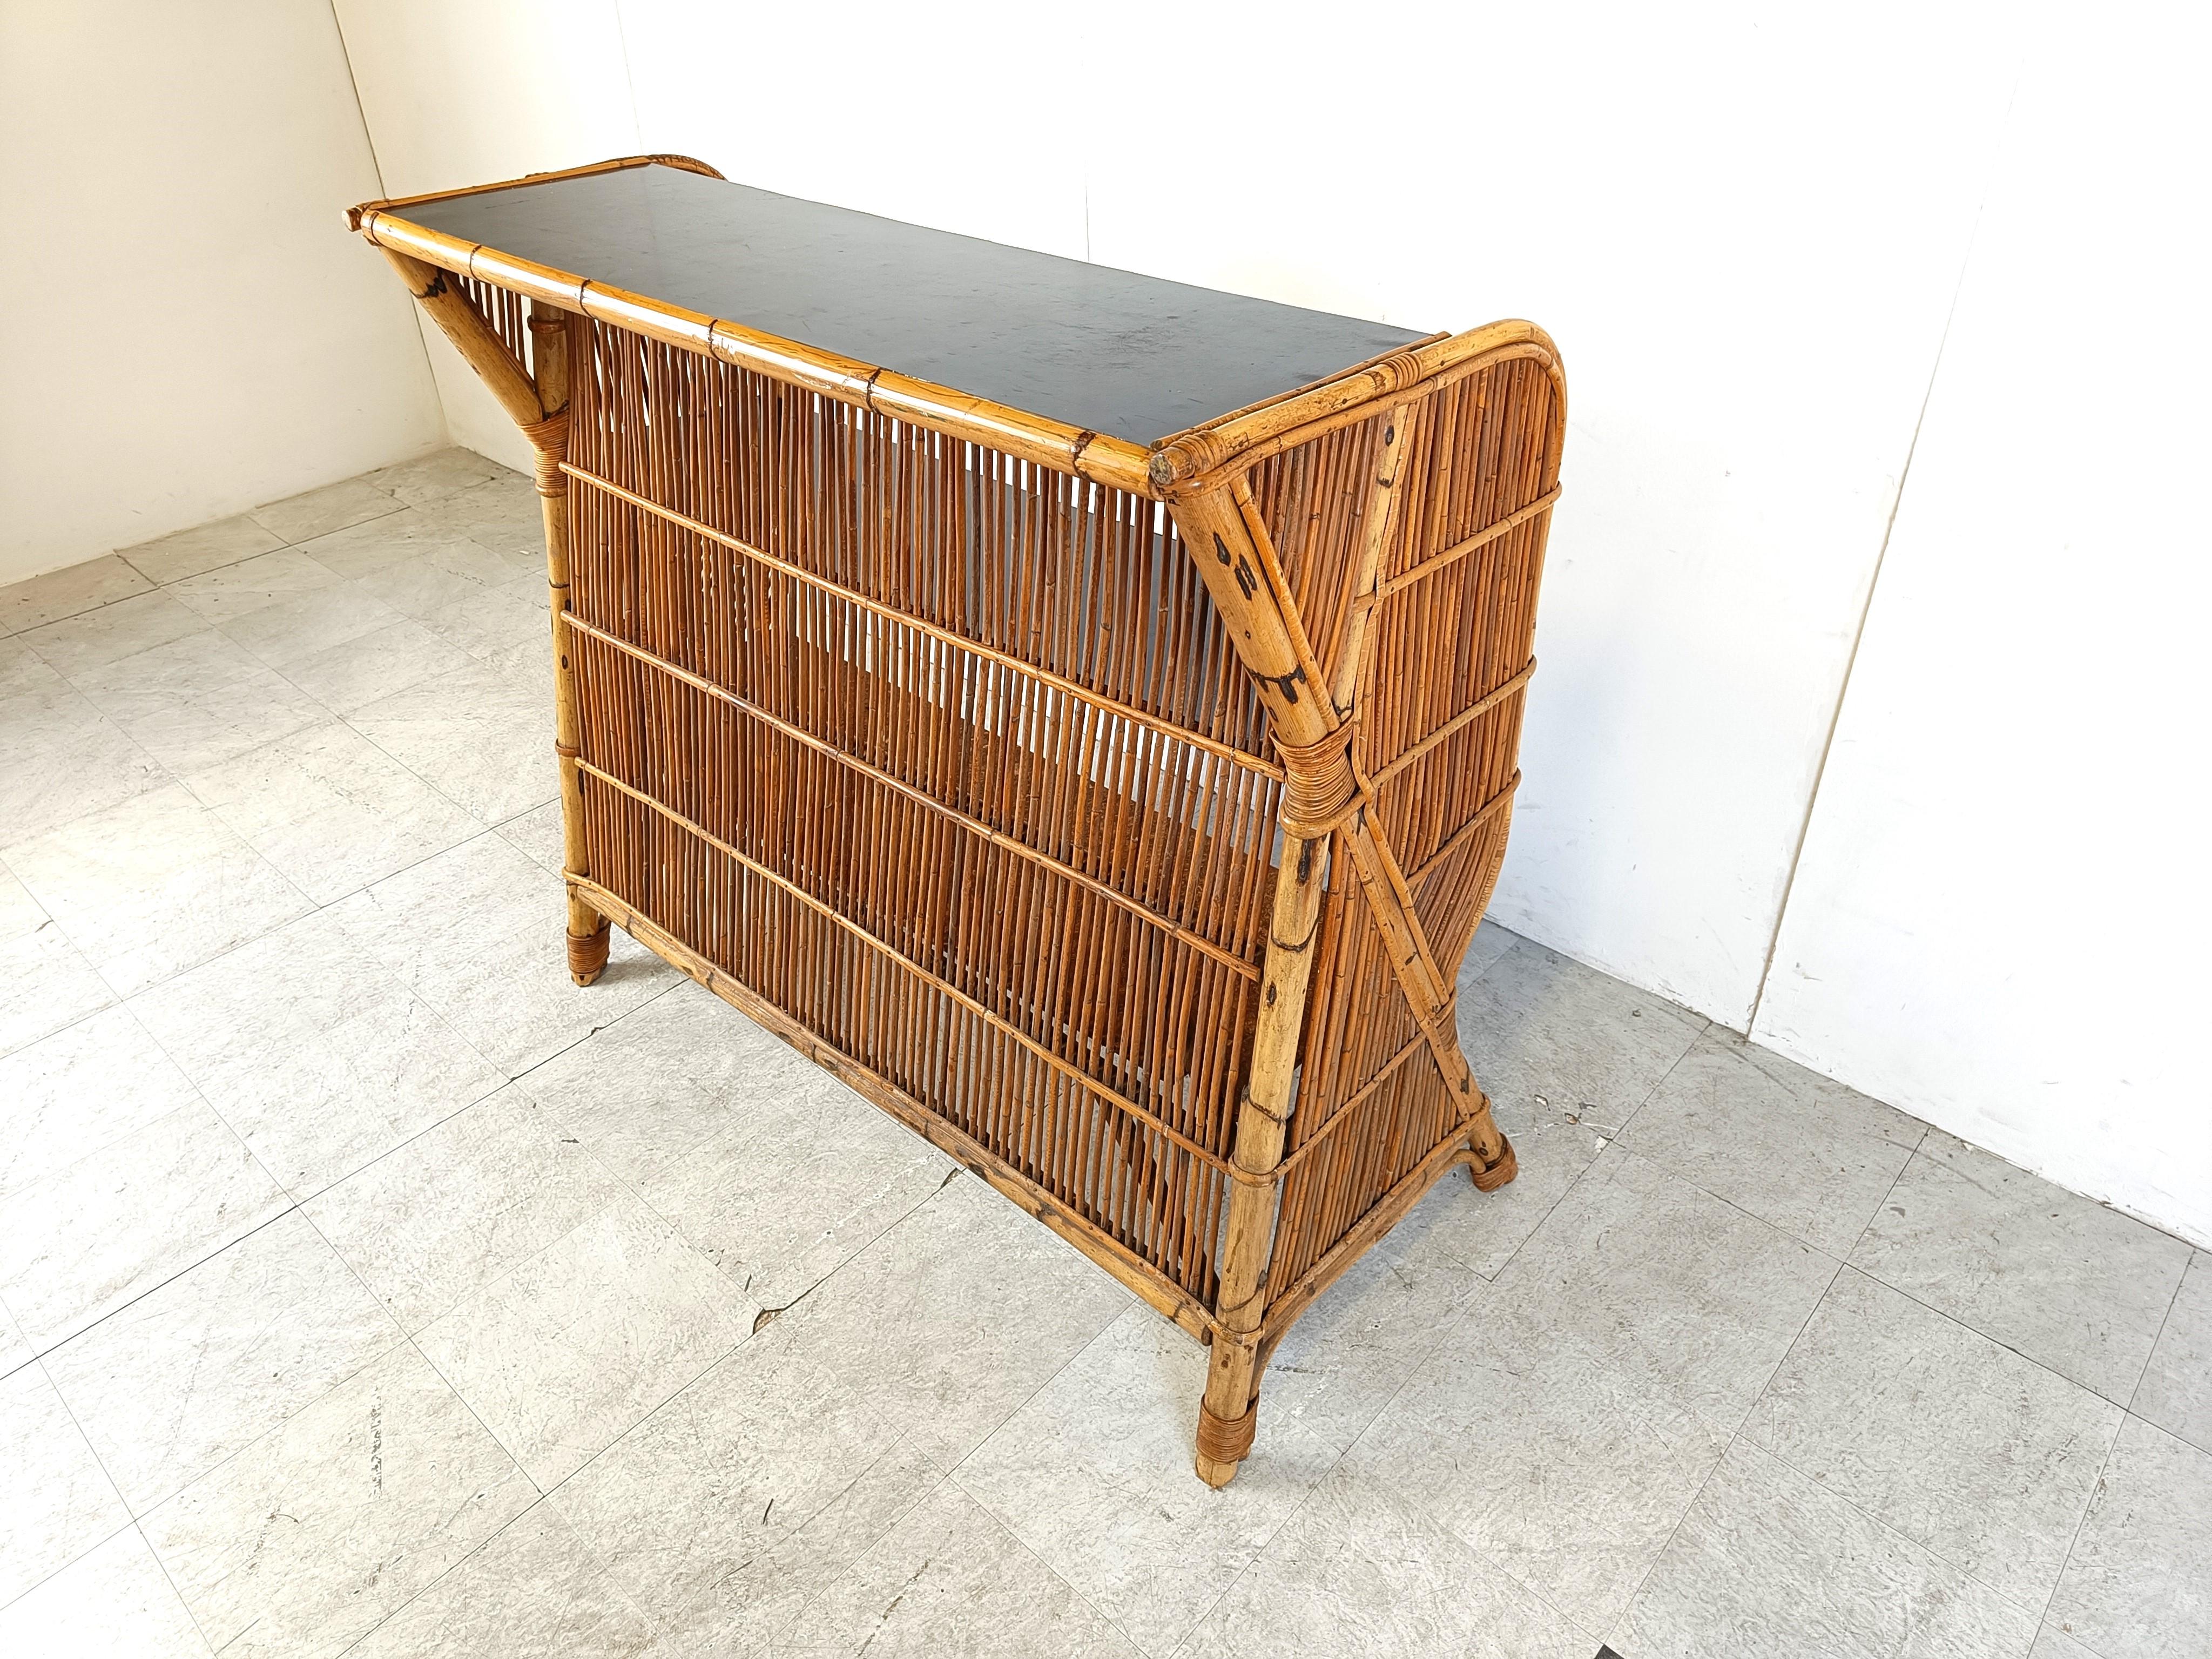 Lovely Tiki bar in bamboo for sale with a black formica table top and beautiful reeded bamboo frame.

Beautiful and well made example.

Very good condition.

1960s - France

Dimensions:
Height: 115cm/45.27